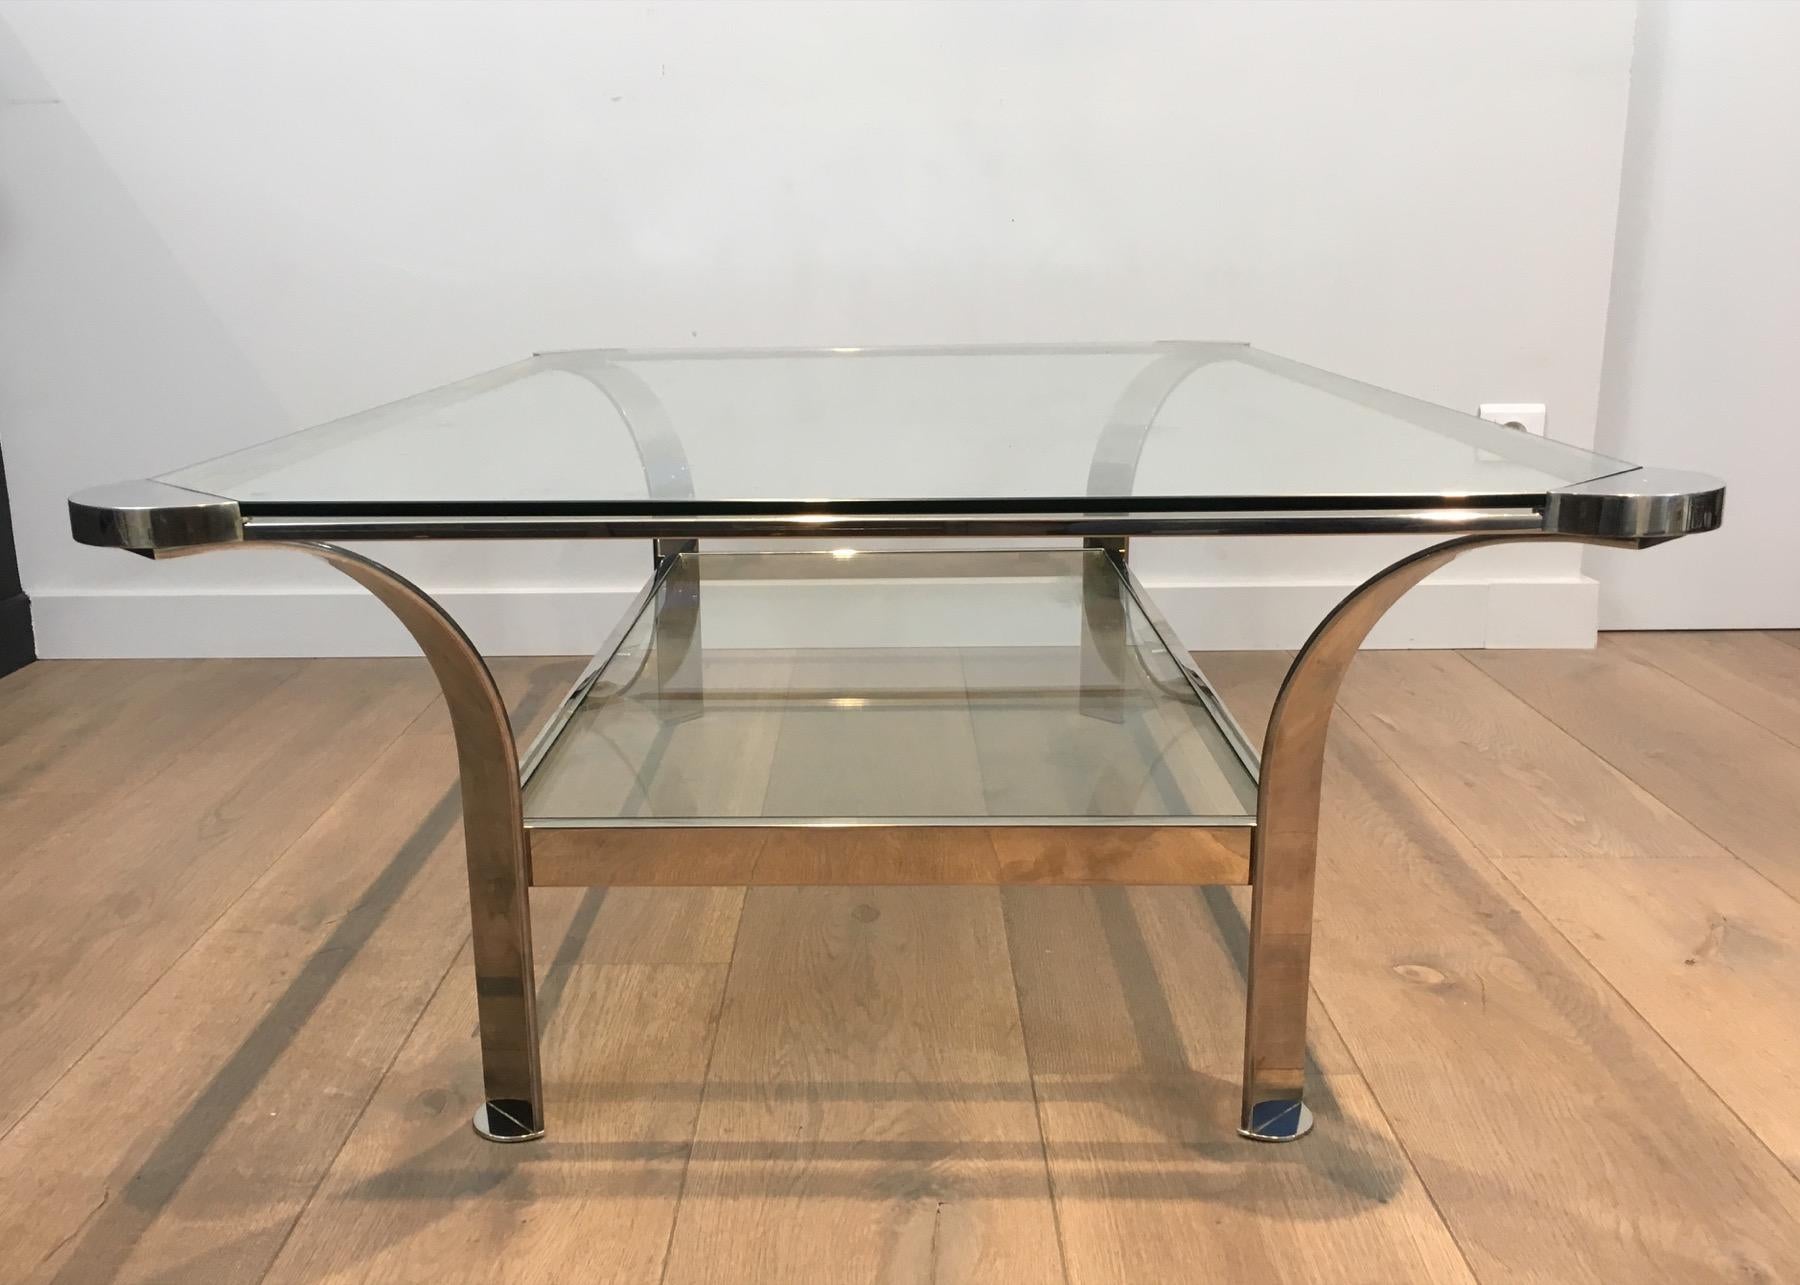 Large Design Chrome Coffee Table with Glass Shelves, French, Circa 1970 For Sale 1